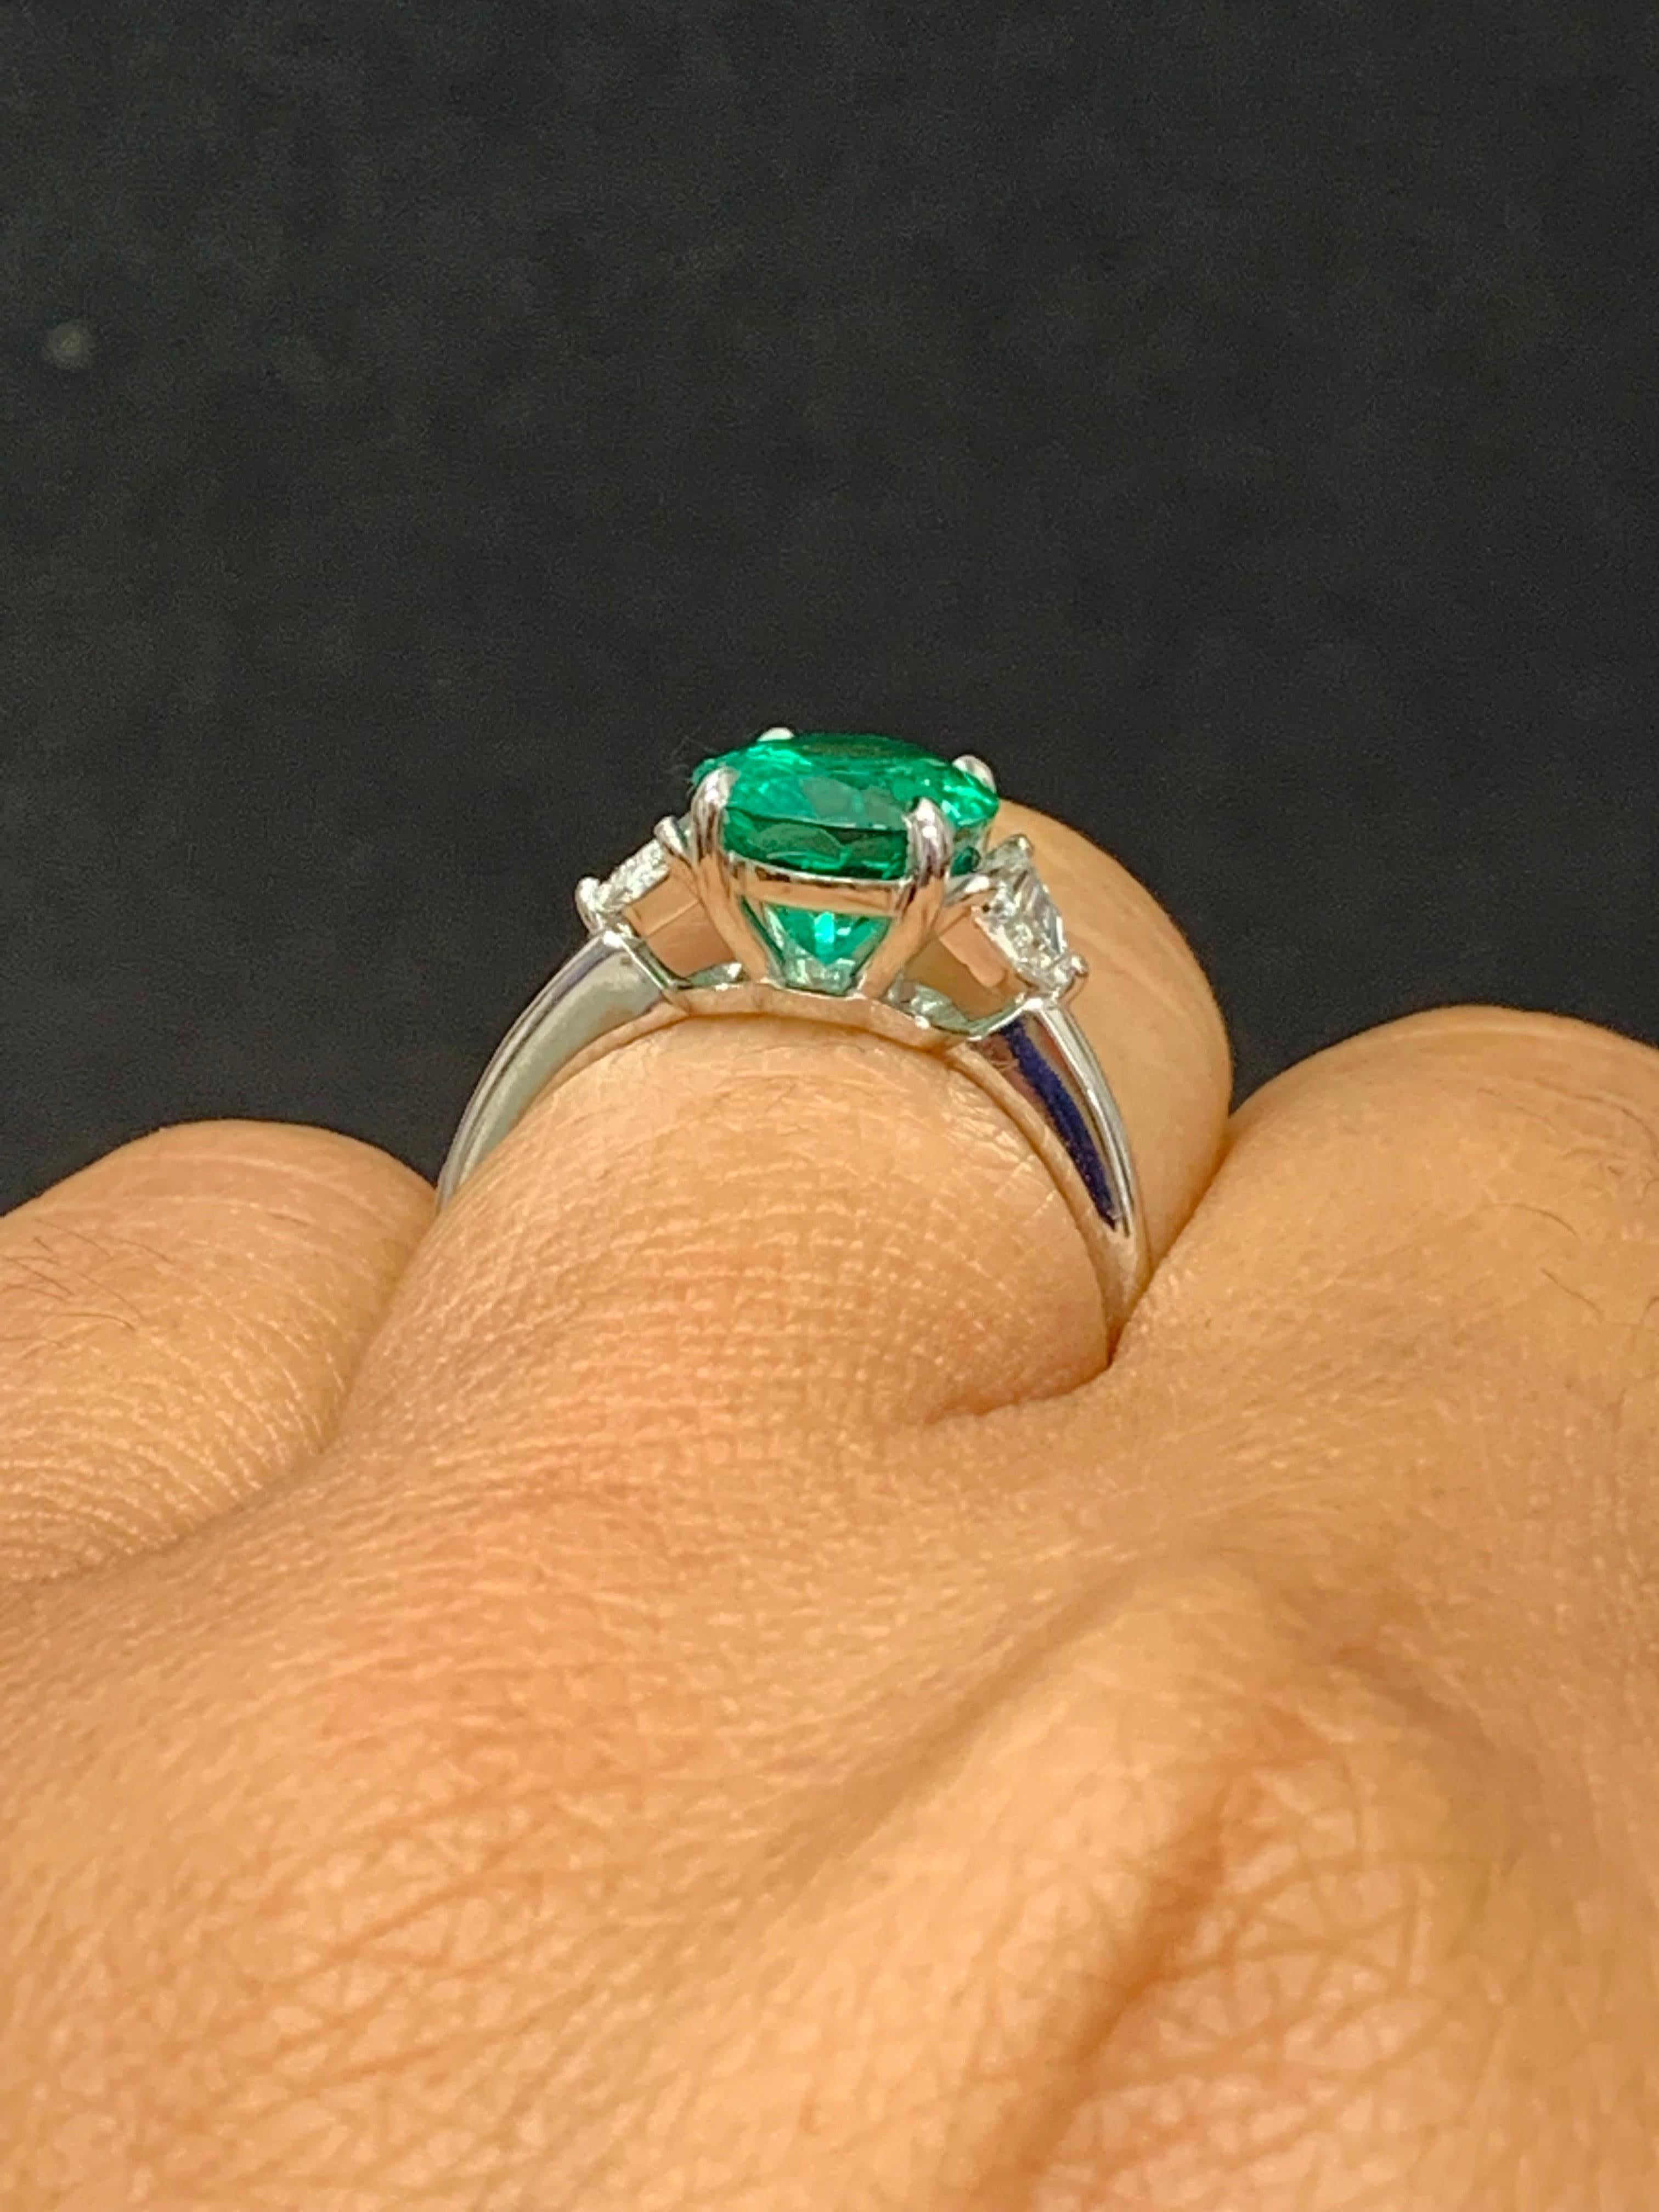 Certified 2.72 Carat Oval Cut Emerald Diamond Engagement Ring in Platinum For Sale 1